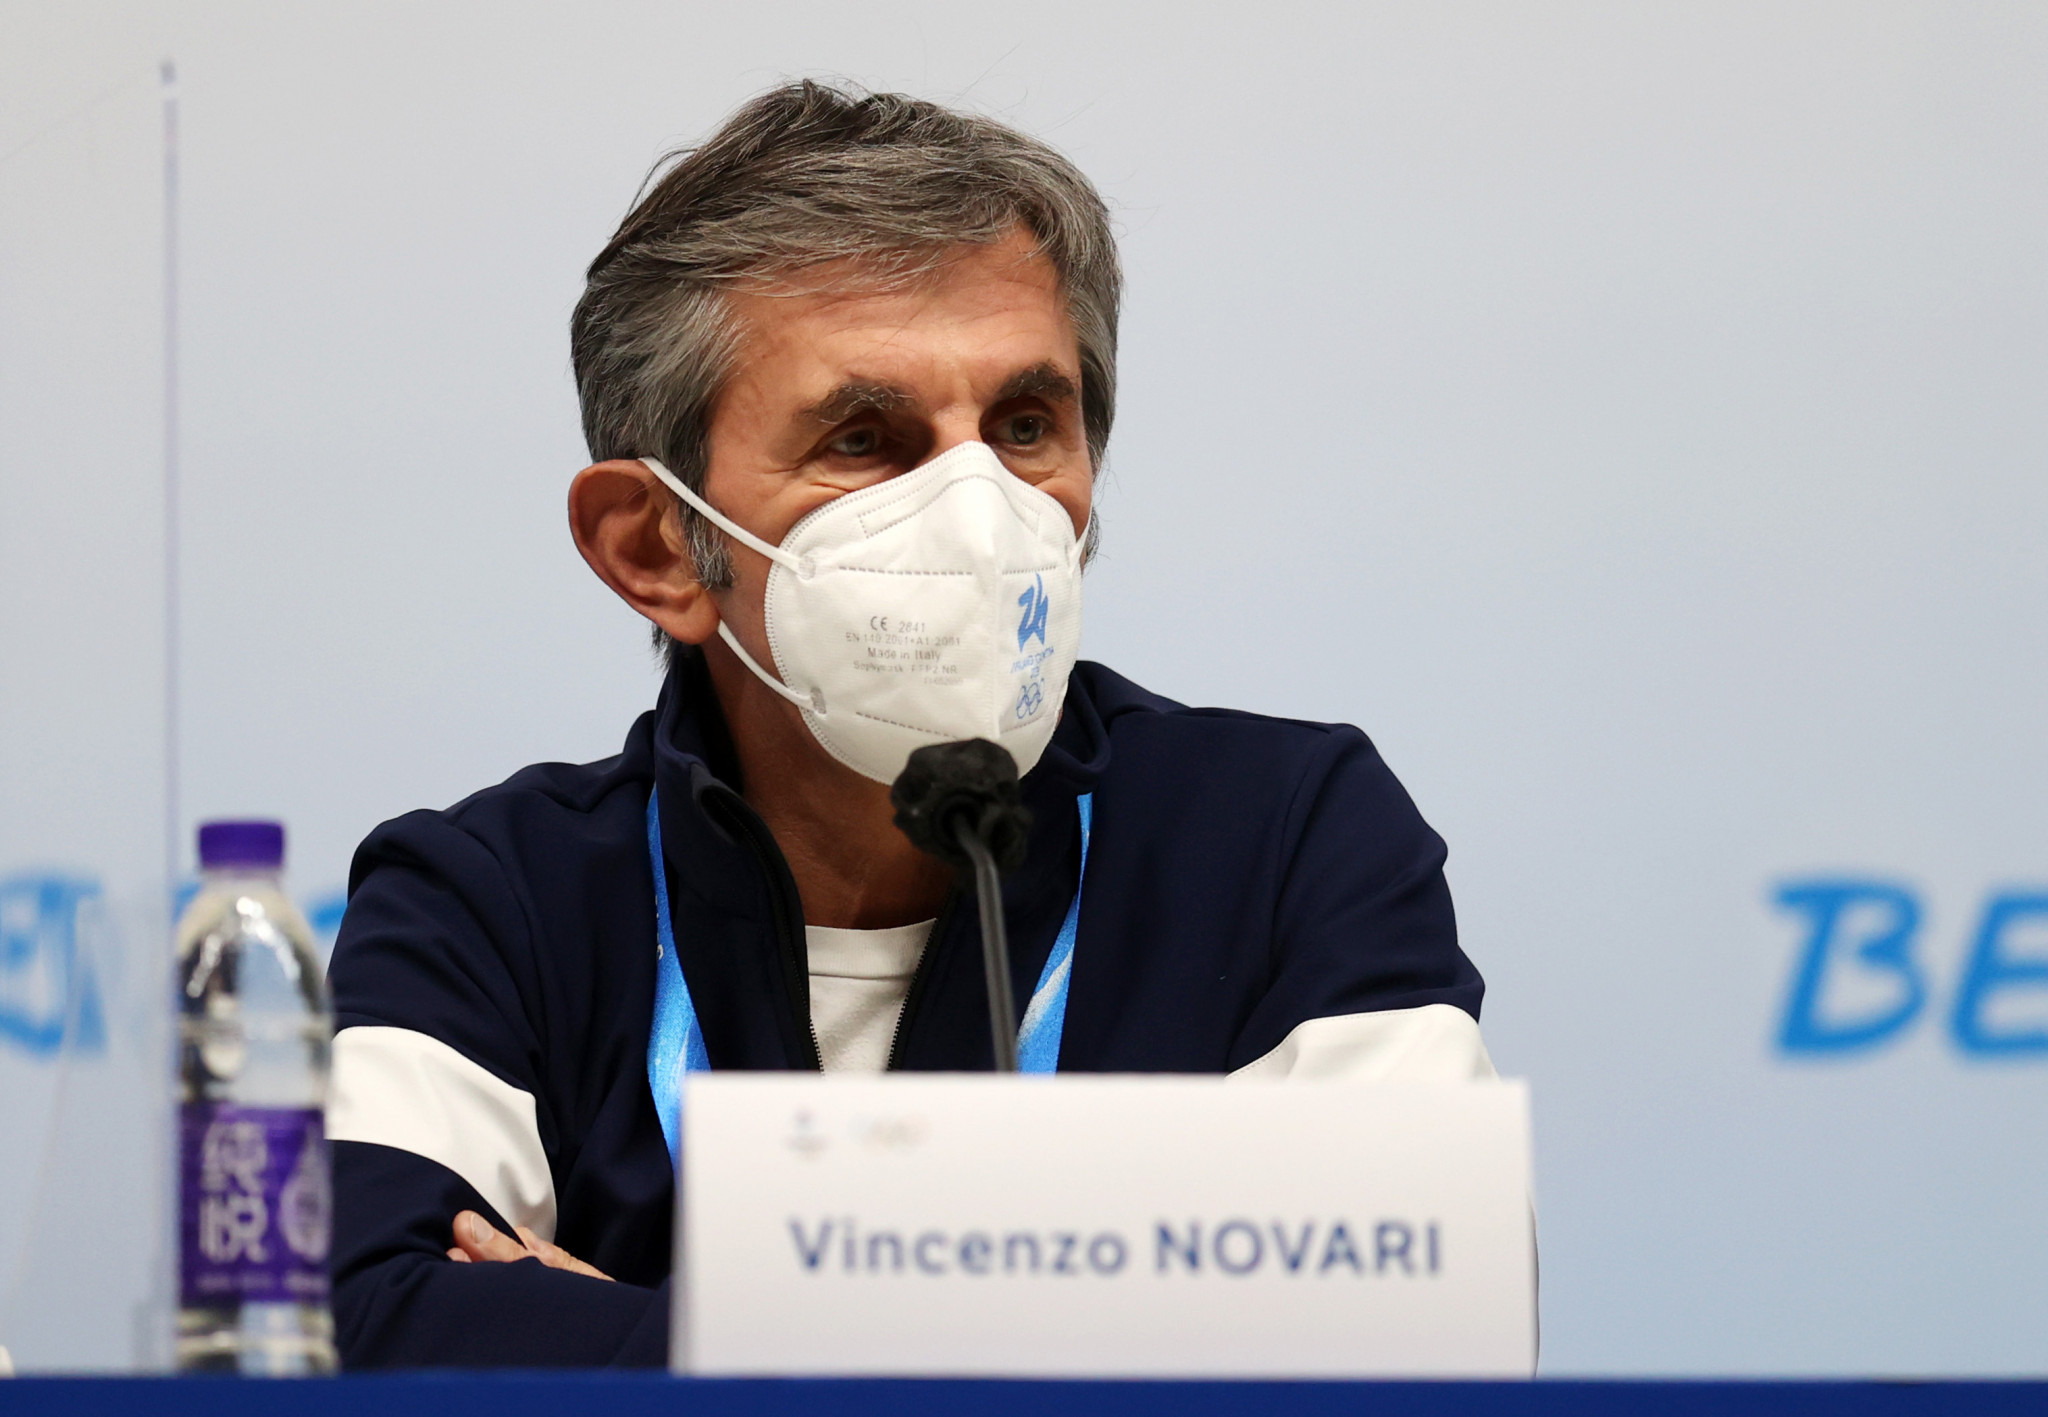 Vincenzo Novari during a press conference at the Beijing 2022 Winter Olympics. GETTY IMAGES